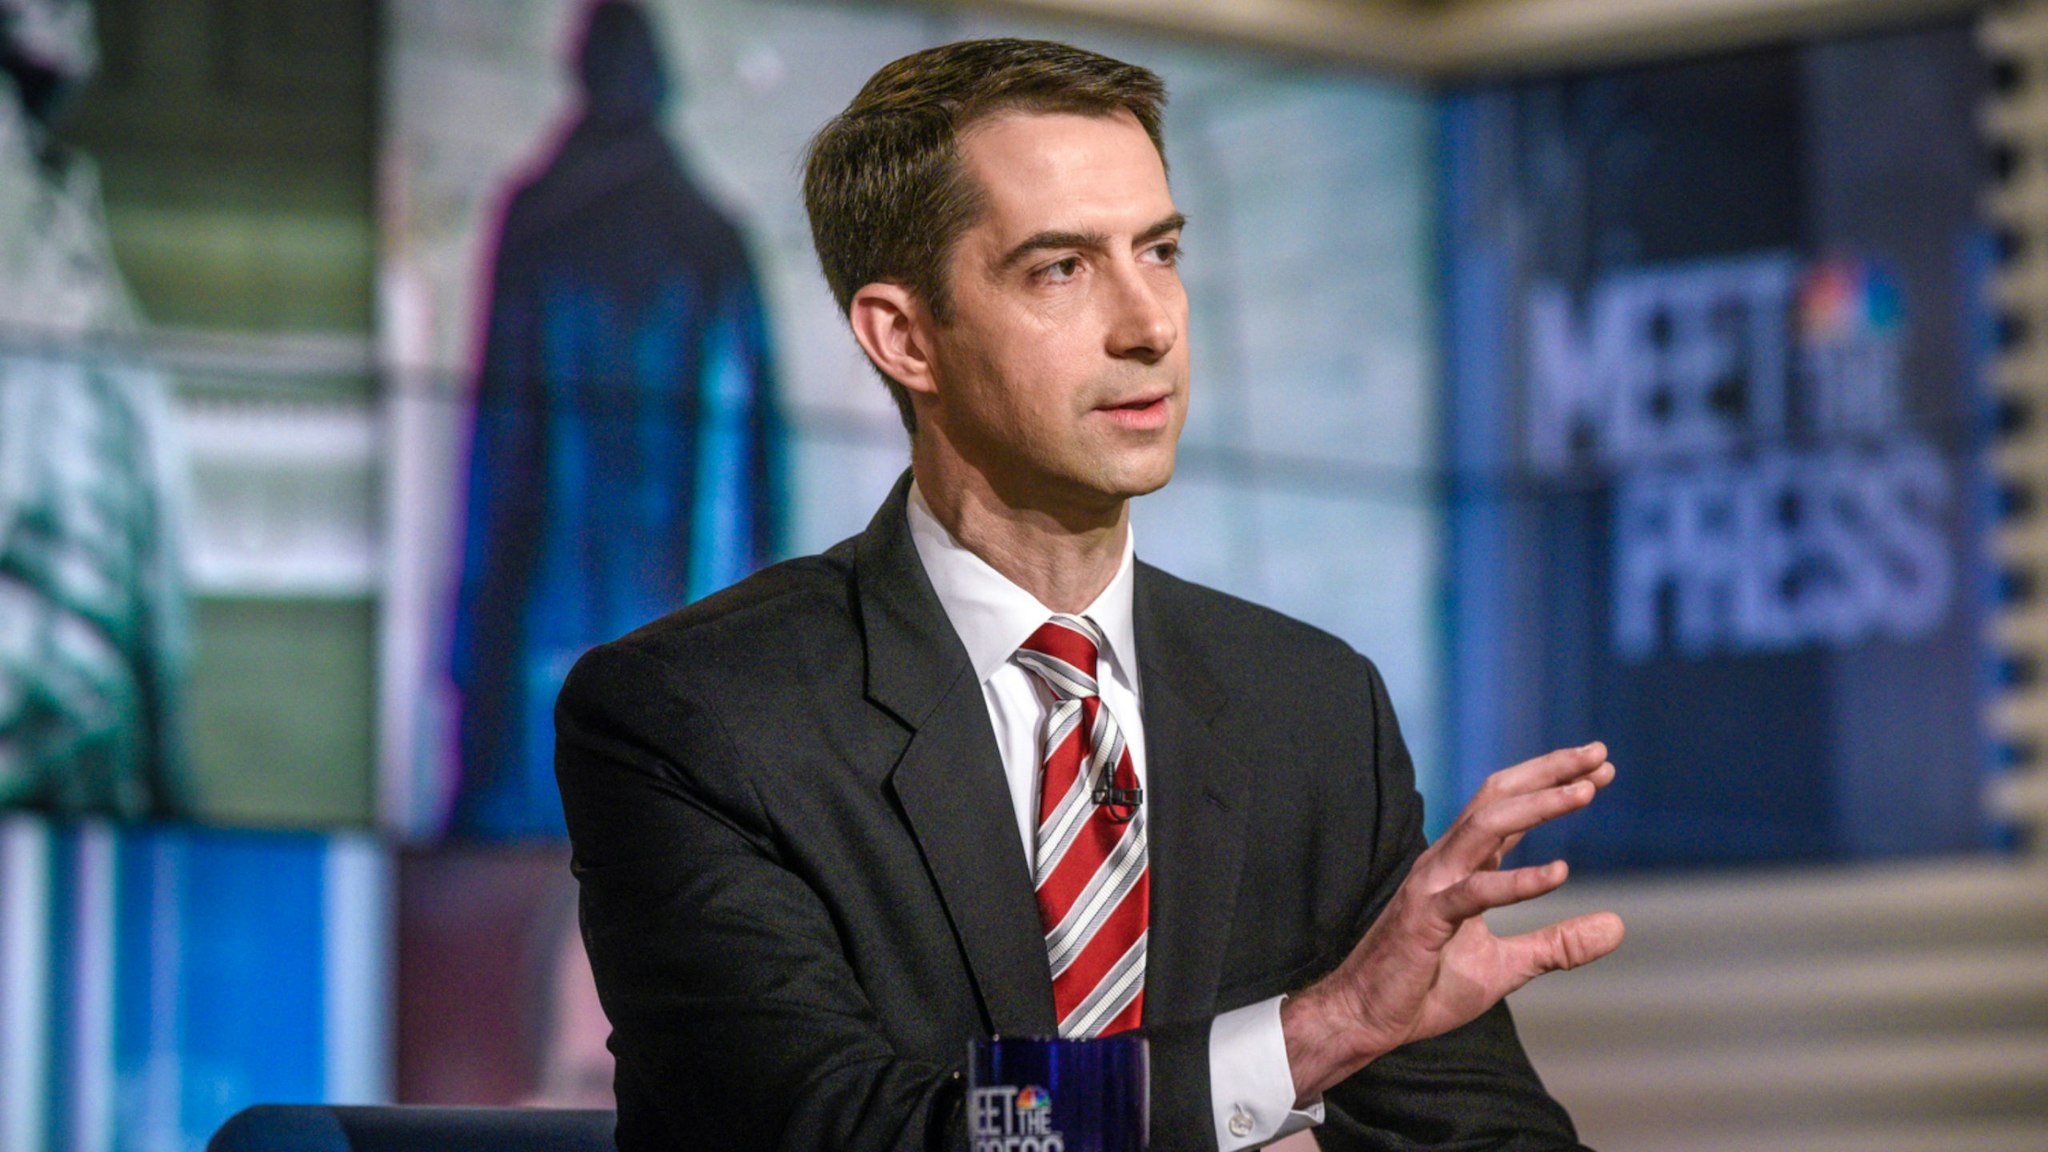 Pictured: (l-r) Sen. Tom Cotton (R-AR) appears on "Meet the Press" in Washington, D.C., Sunday, Jan. 21, 2018.